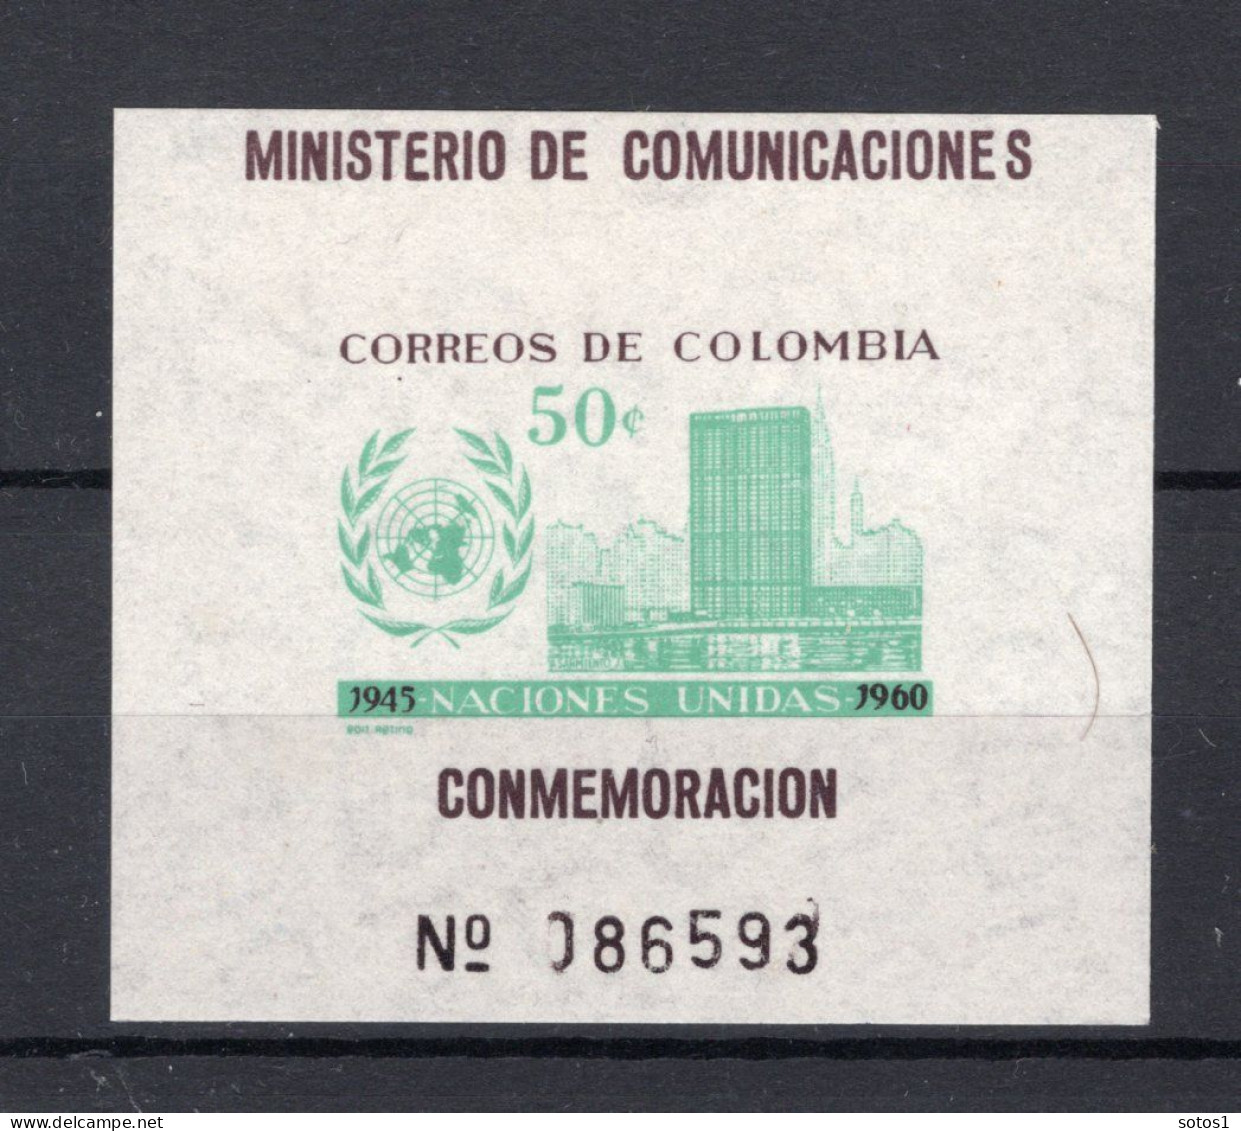 COLOMBIA Yt. BF21  MNH 1960 - Colombia